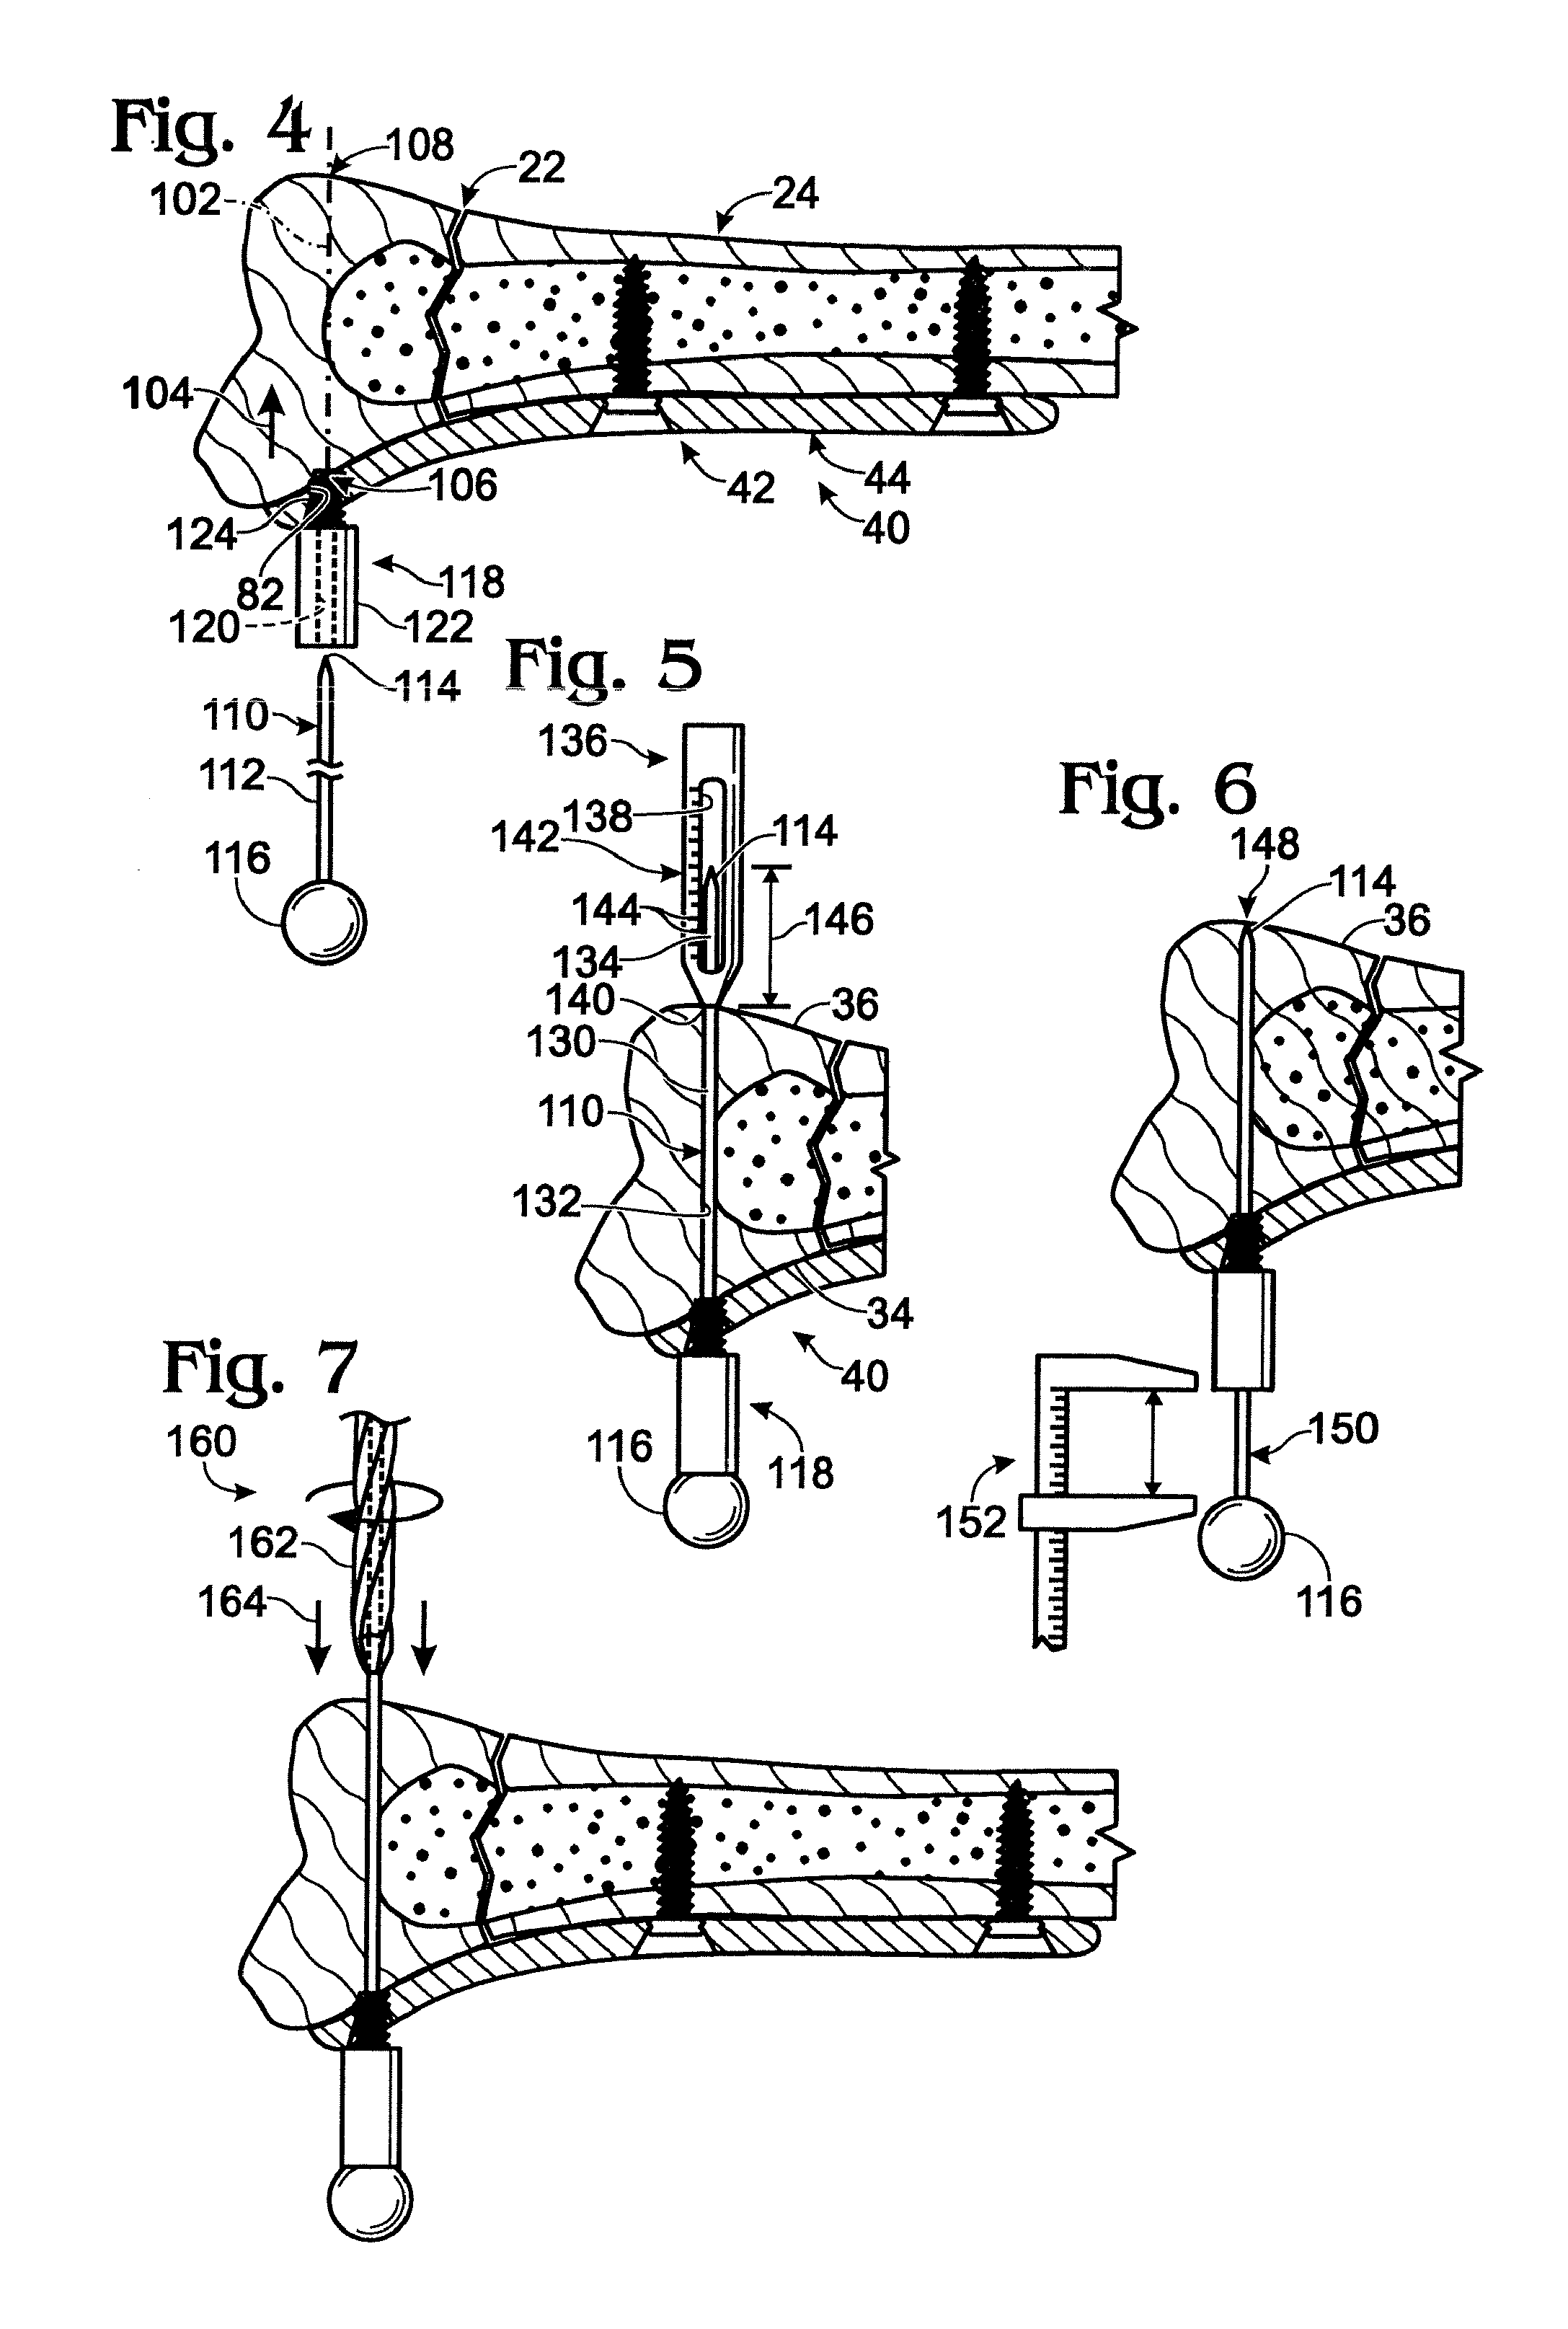 Bone fixation with a bone plate attached to a fastener assembly